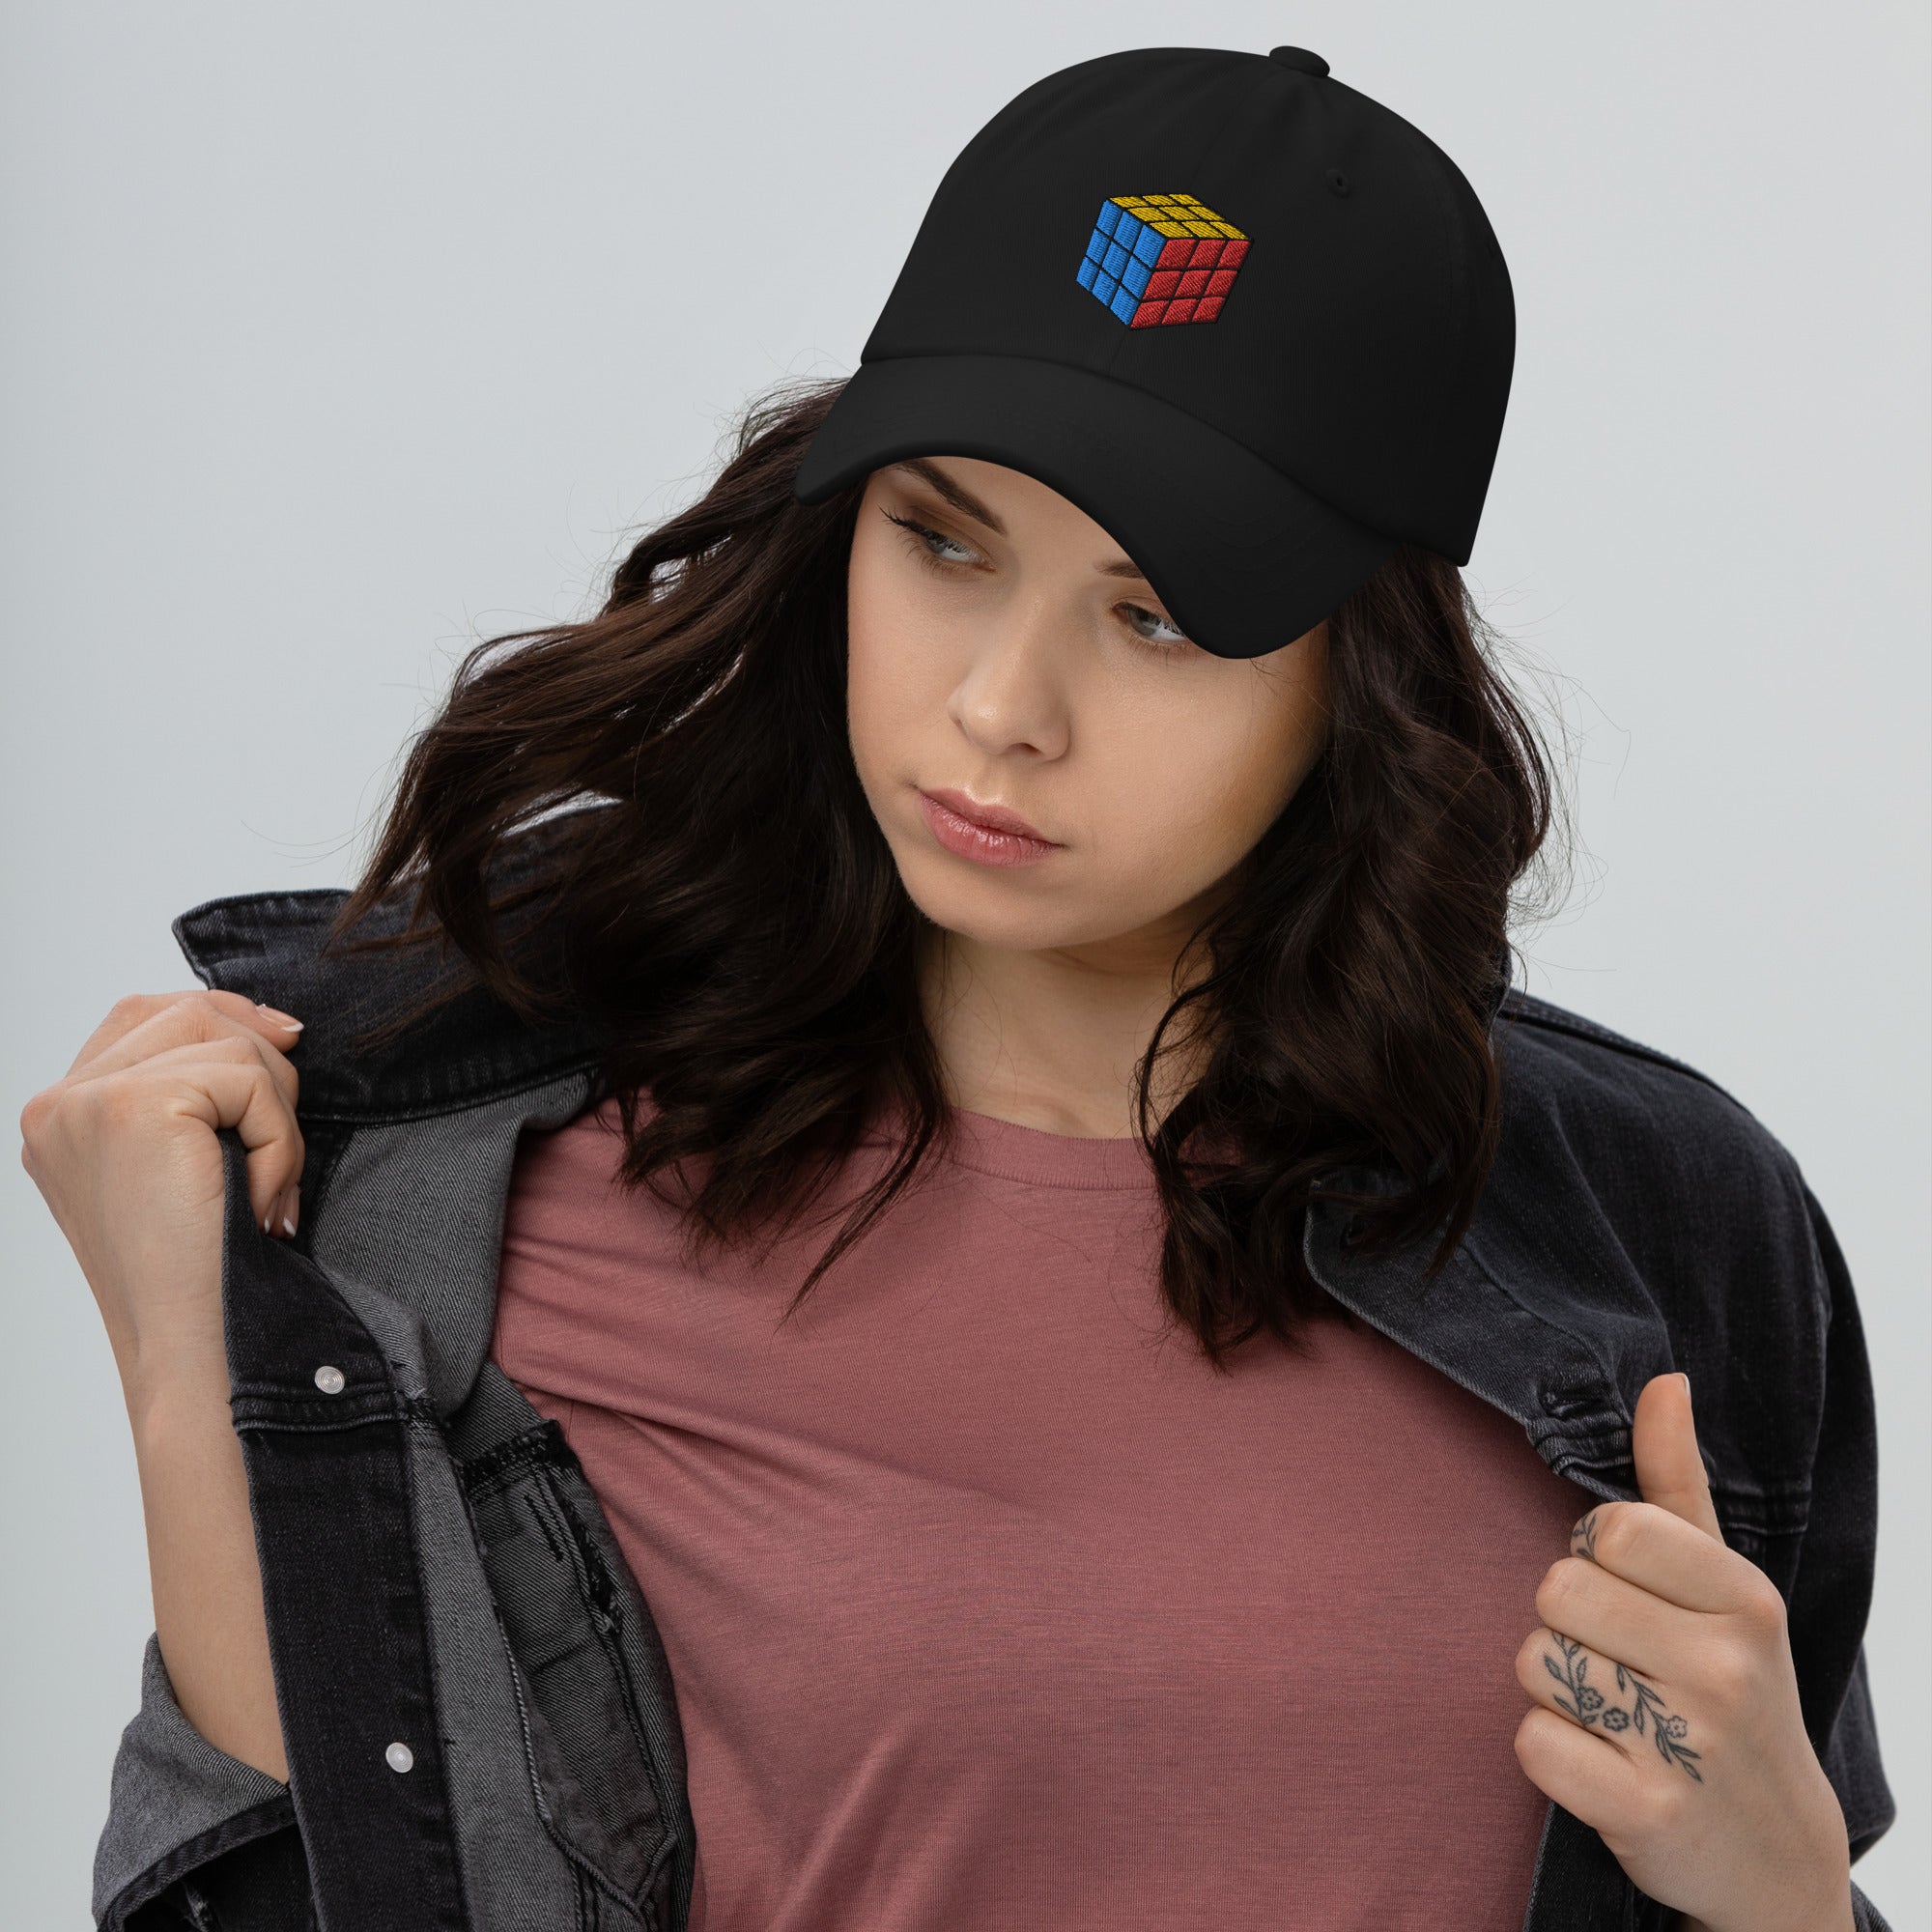 Gaming Speed Cube Puzzle Box Embroidered Baseball Cap Rubik's Cube Dad hat - Edge of Life Designs